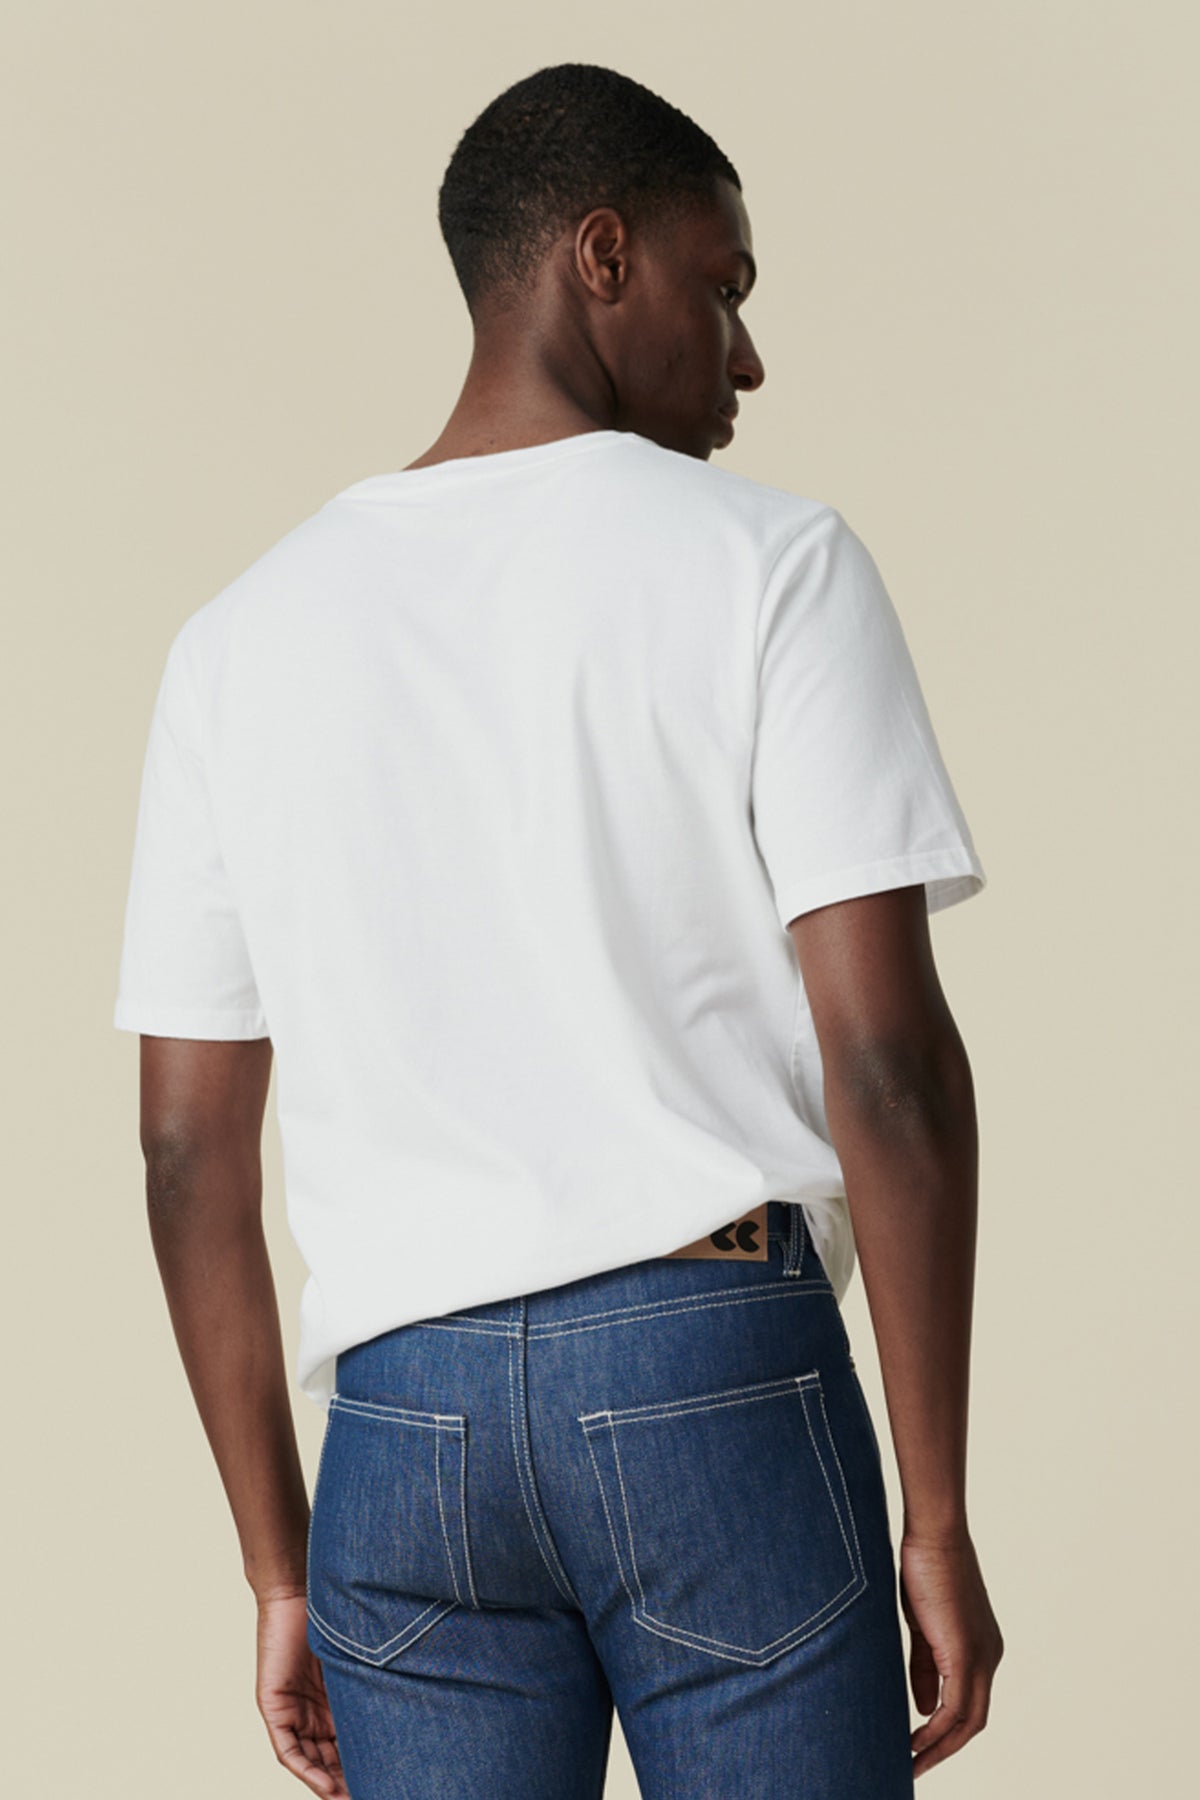 
            Back of male wearing short sleeve white t shirt paired with blue jeans